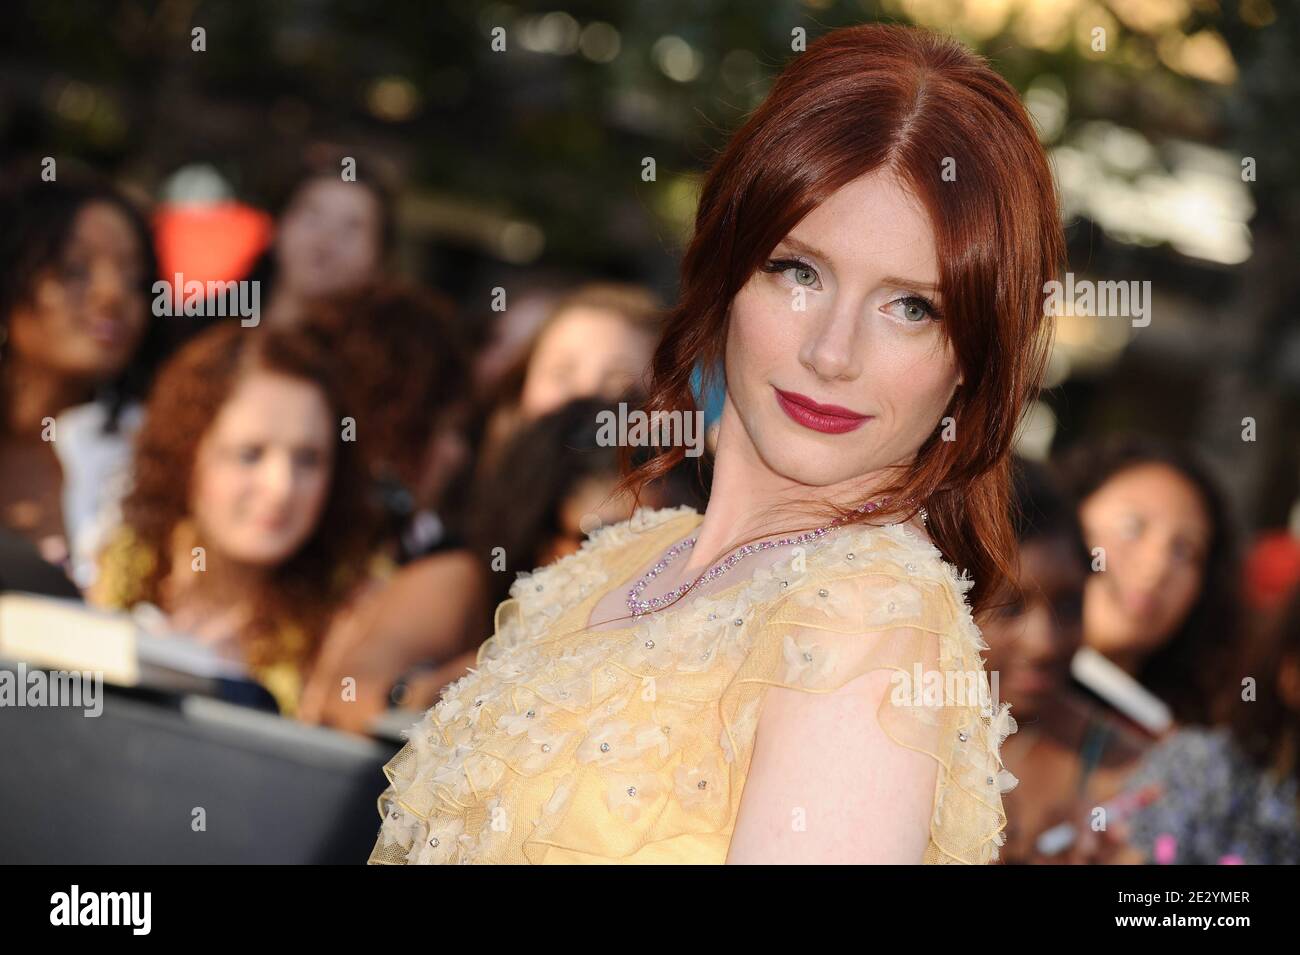 'Bryce Dallas Howard attends the premiere of ''The Twilight Saga: Eclipse'' part of the 2010 Los Angeles Film Festival. Los Angeles, June 24, 2010. (Pictured : Bryce Dallas Howard). Photo by Lionel Hahn/ABACAPRESS.COM' Stock Photo